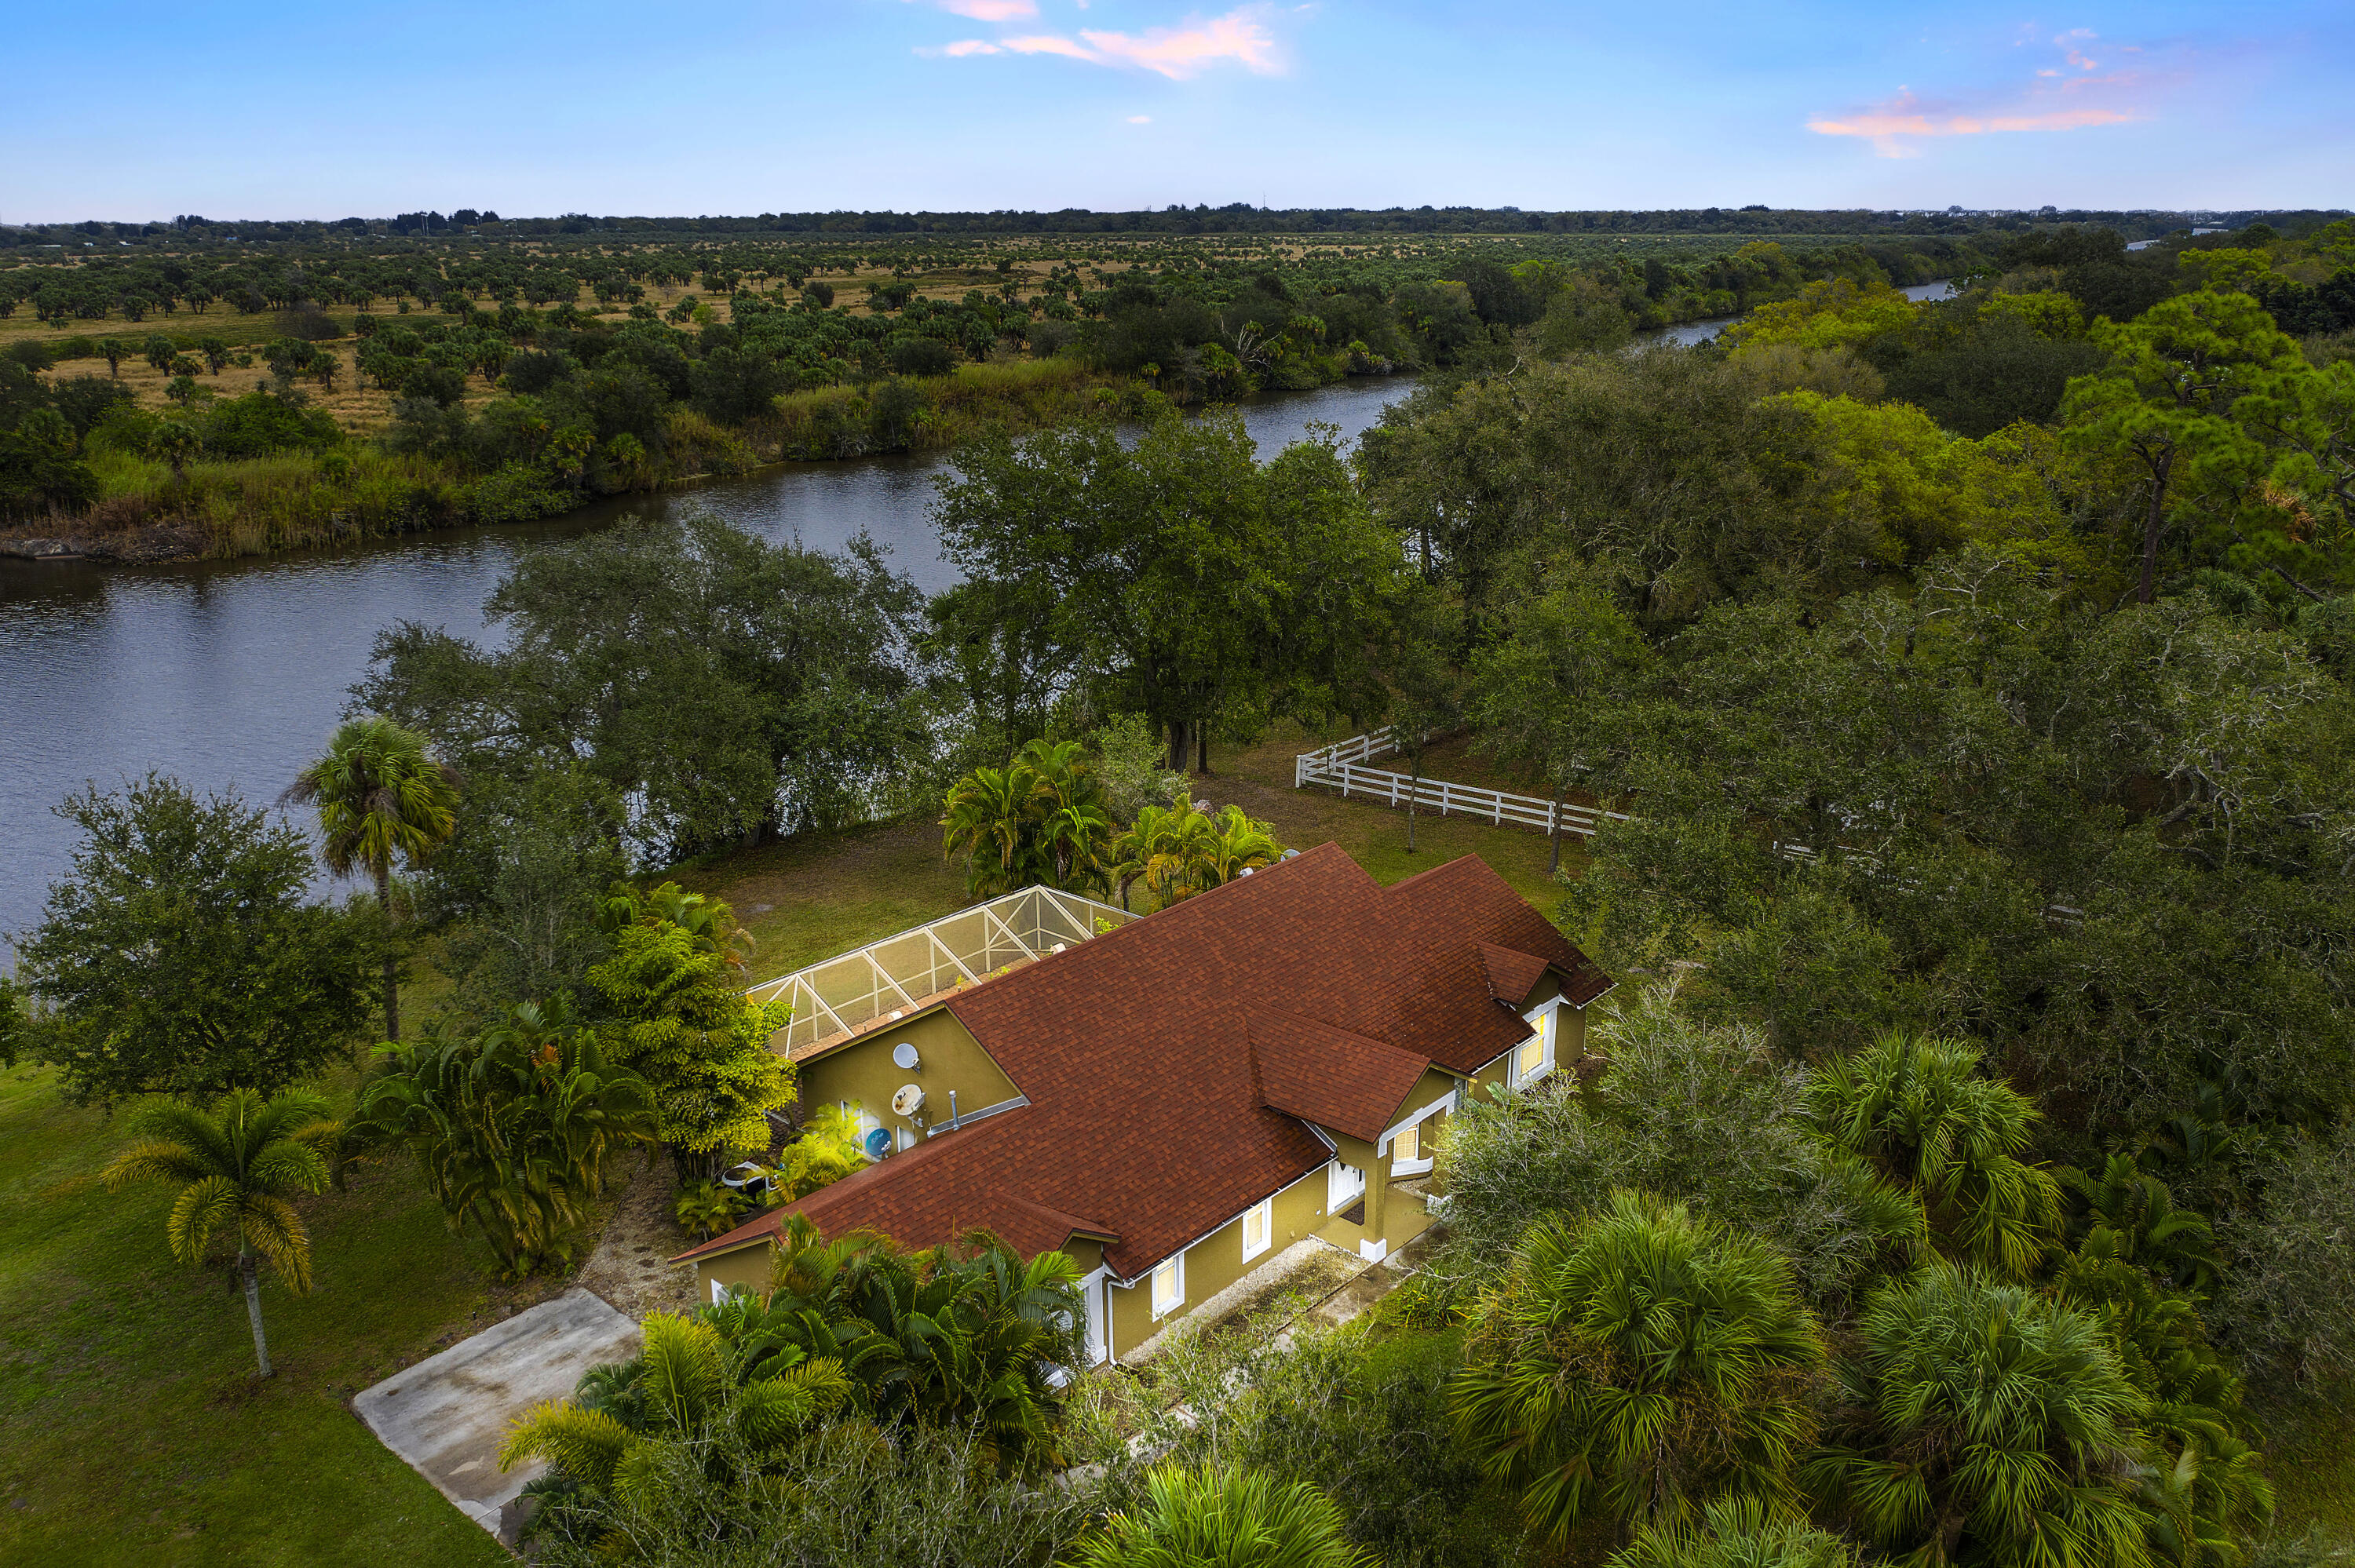 an aerial view of lake residential houses with outdoor space and trees